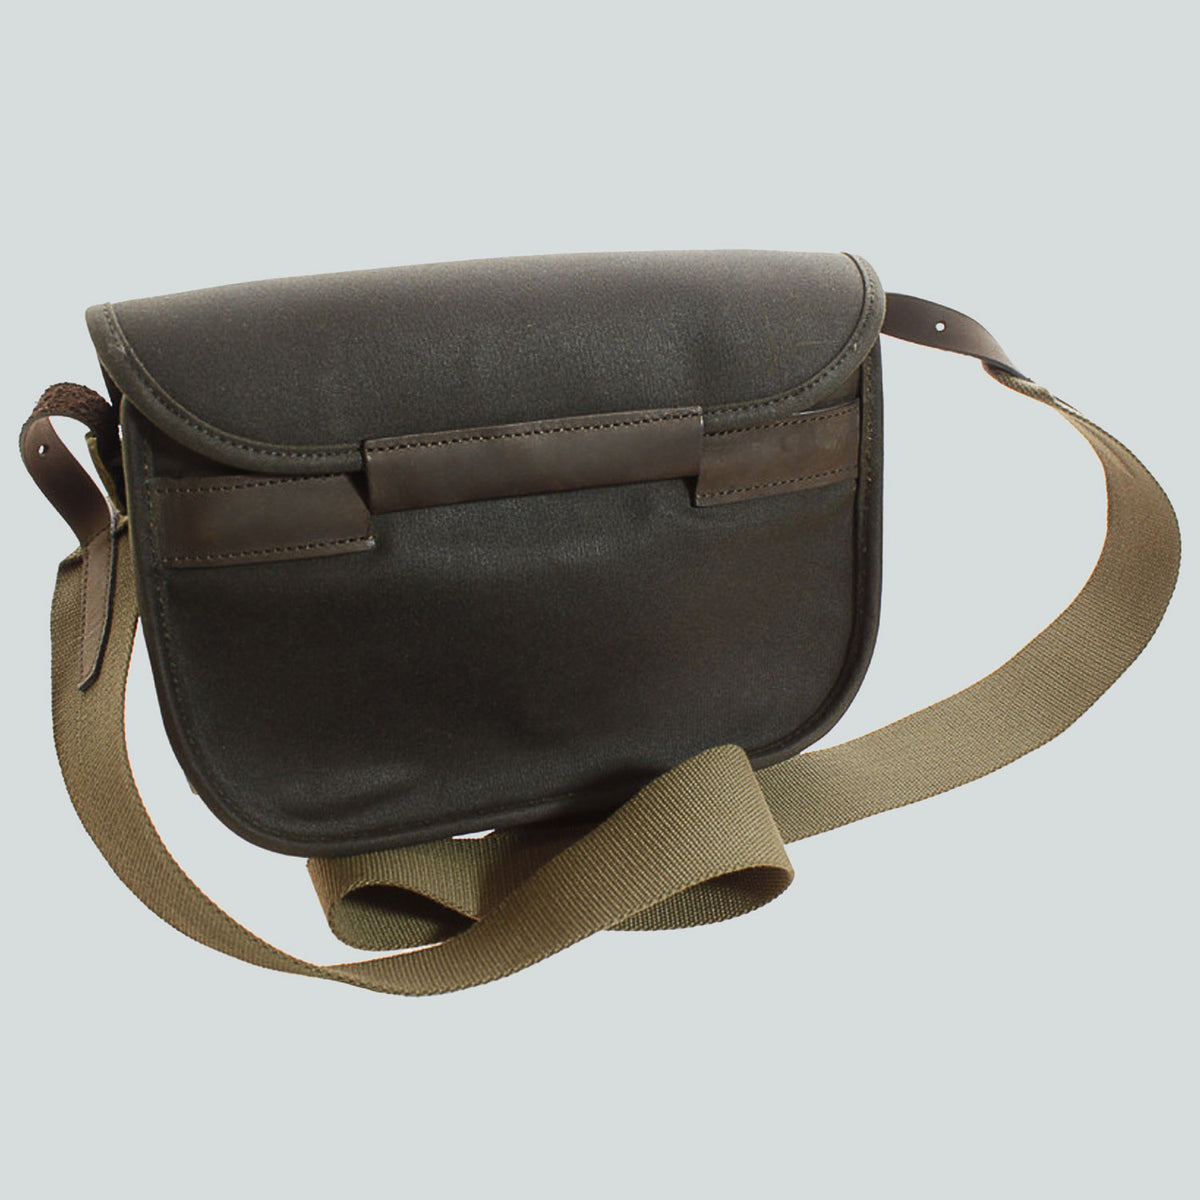 Barbour Cartridge Bag- Wax Leather 